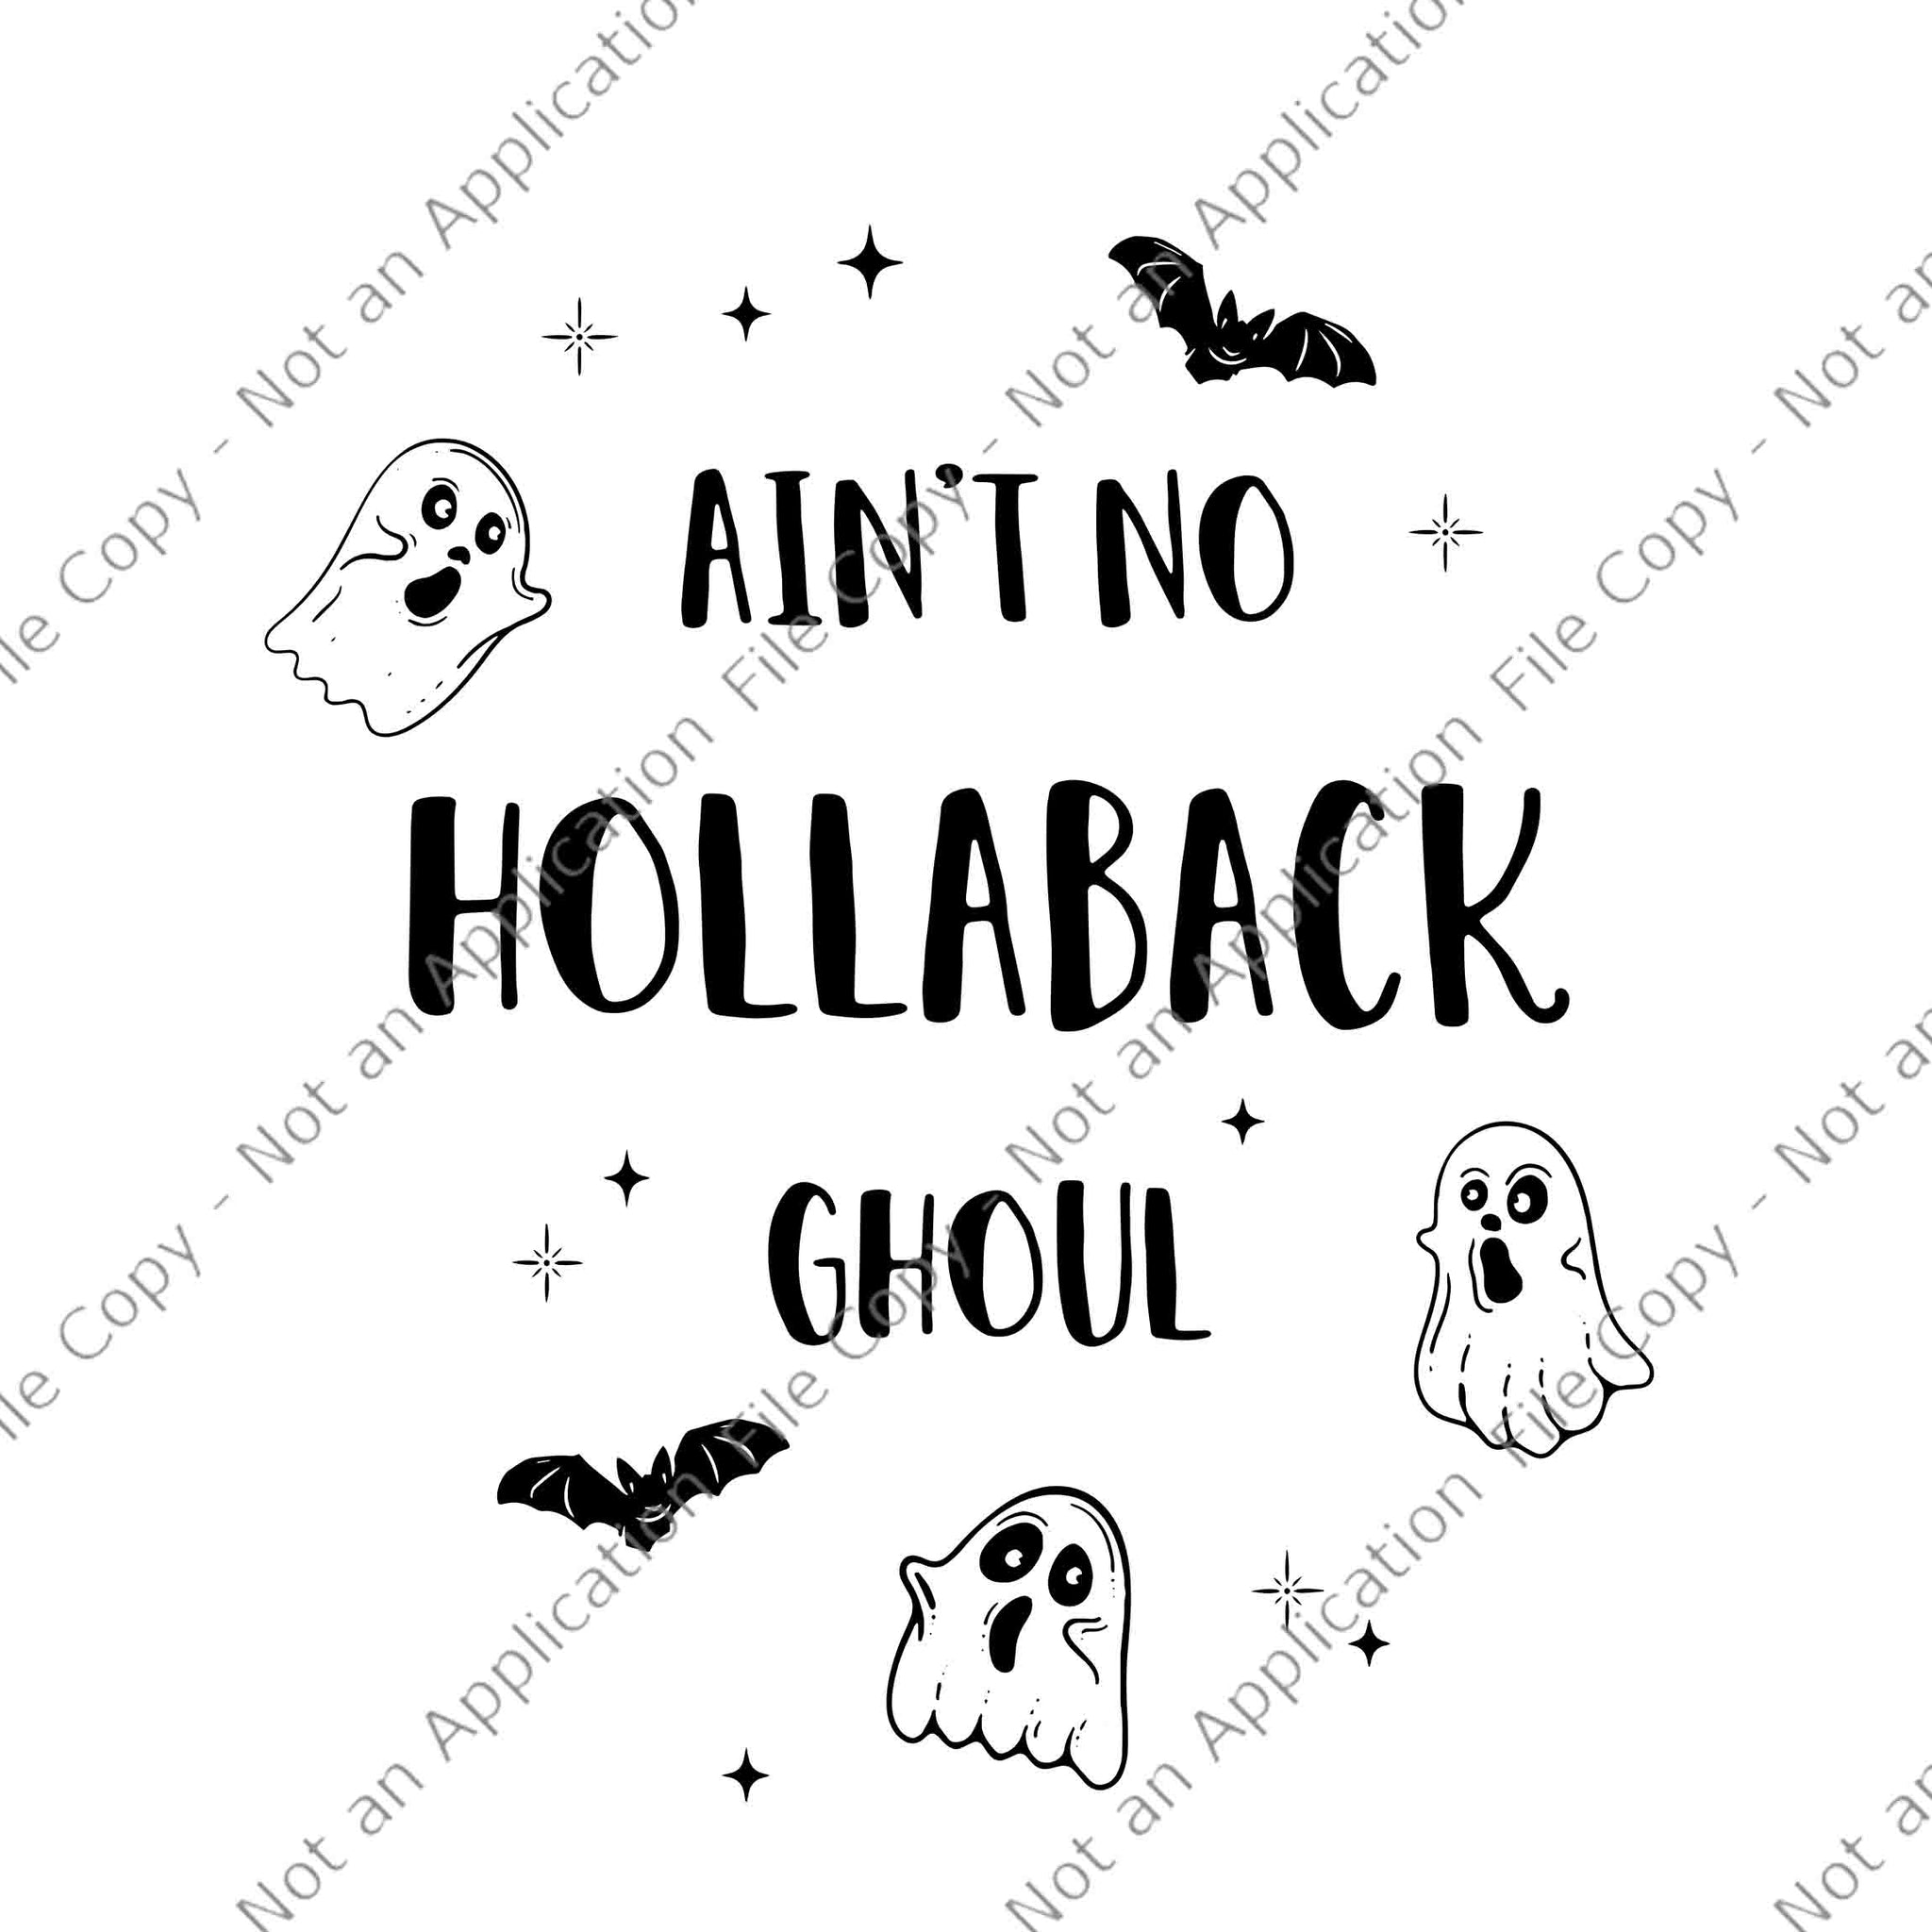 Ain't No Hollaback Ghoul Halloween Boo Svg, Boo Halloween Svg, Boo Boo Svg, Halloween Svg, Ghost Svg